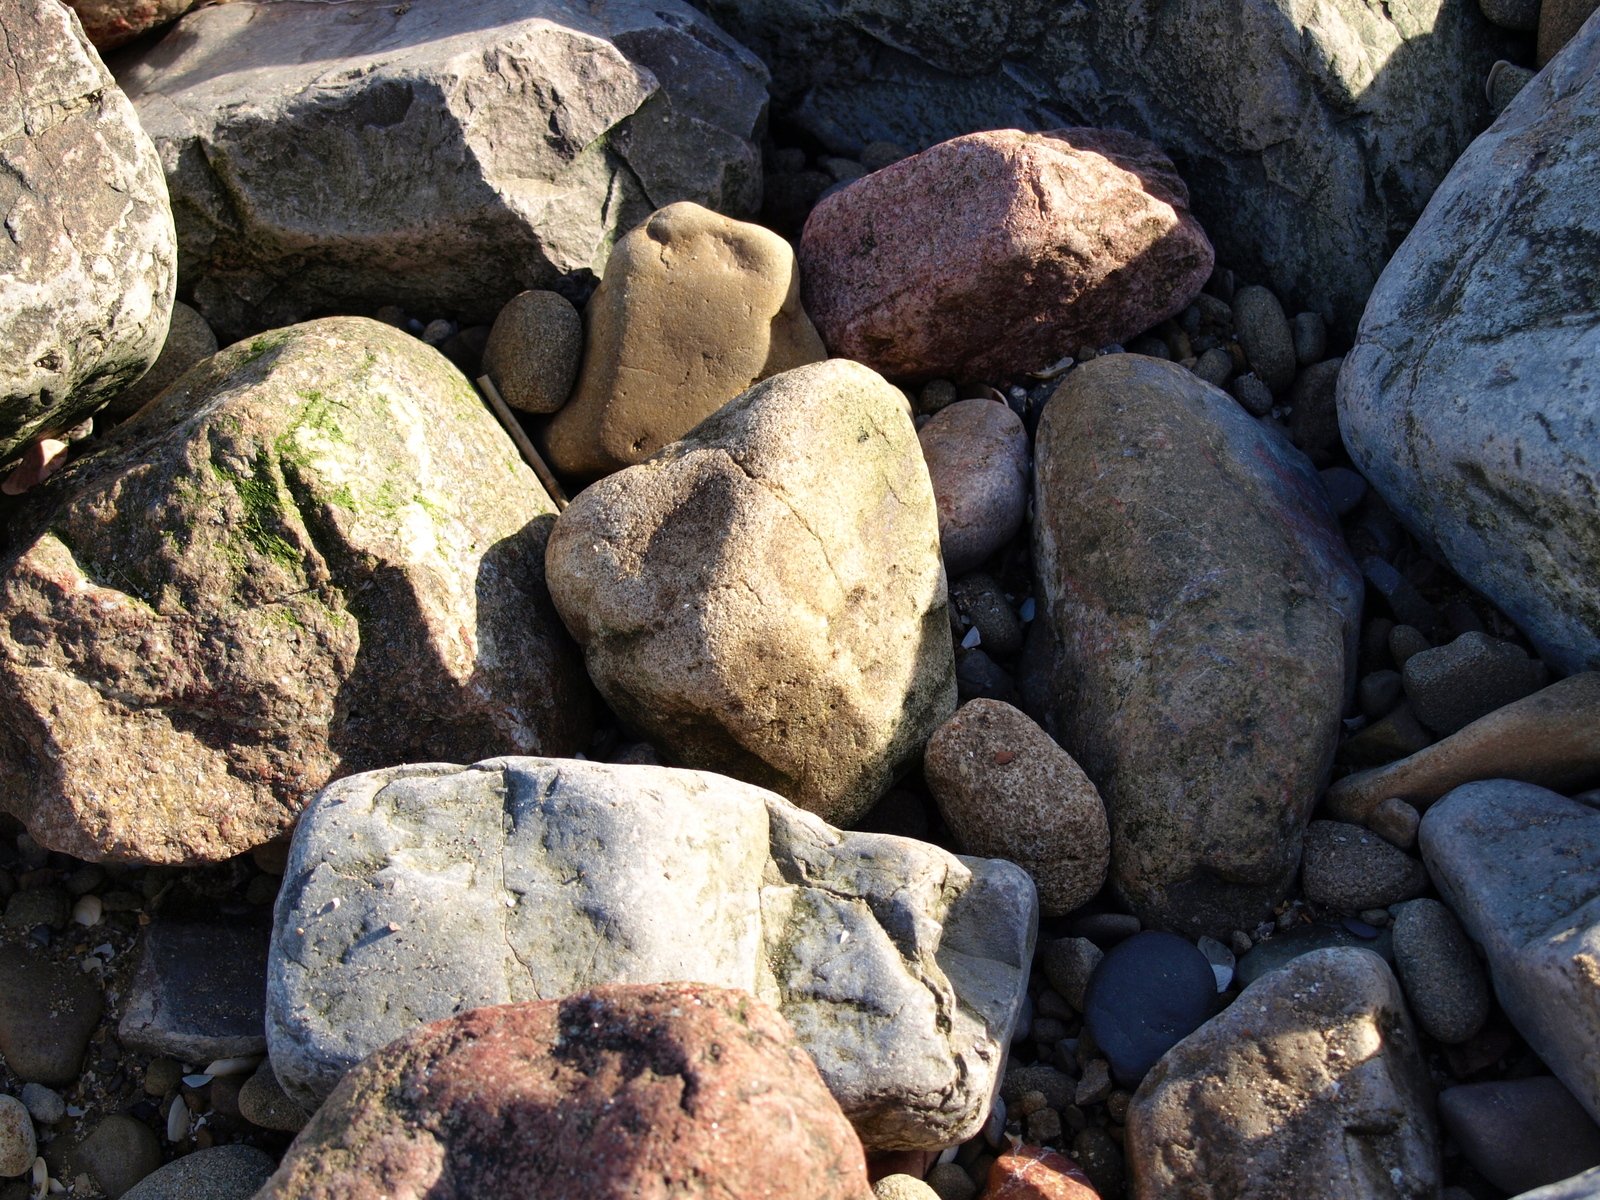 some very cute rocks and rocks in the ground